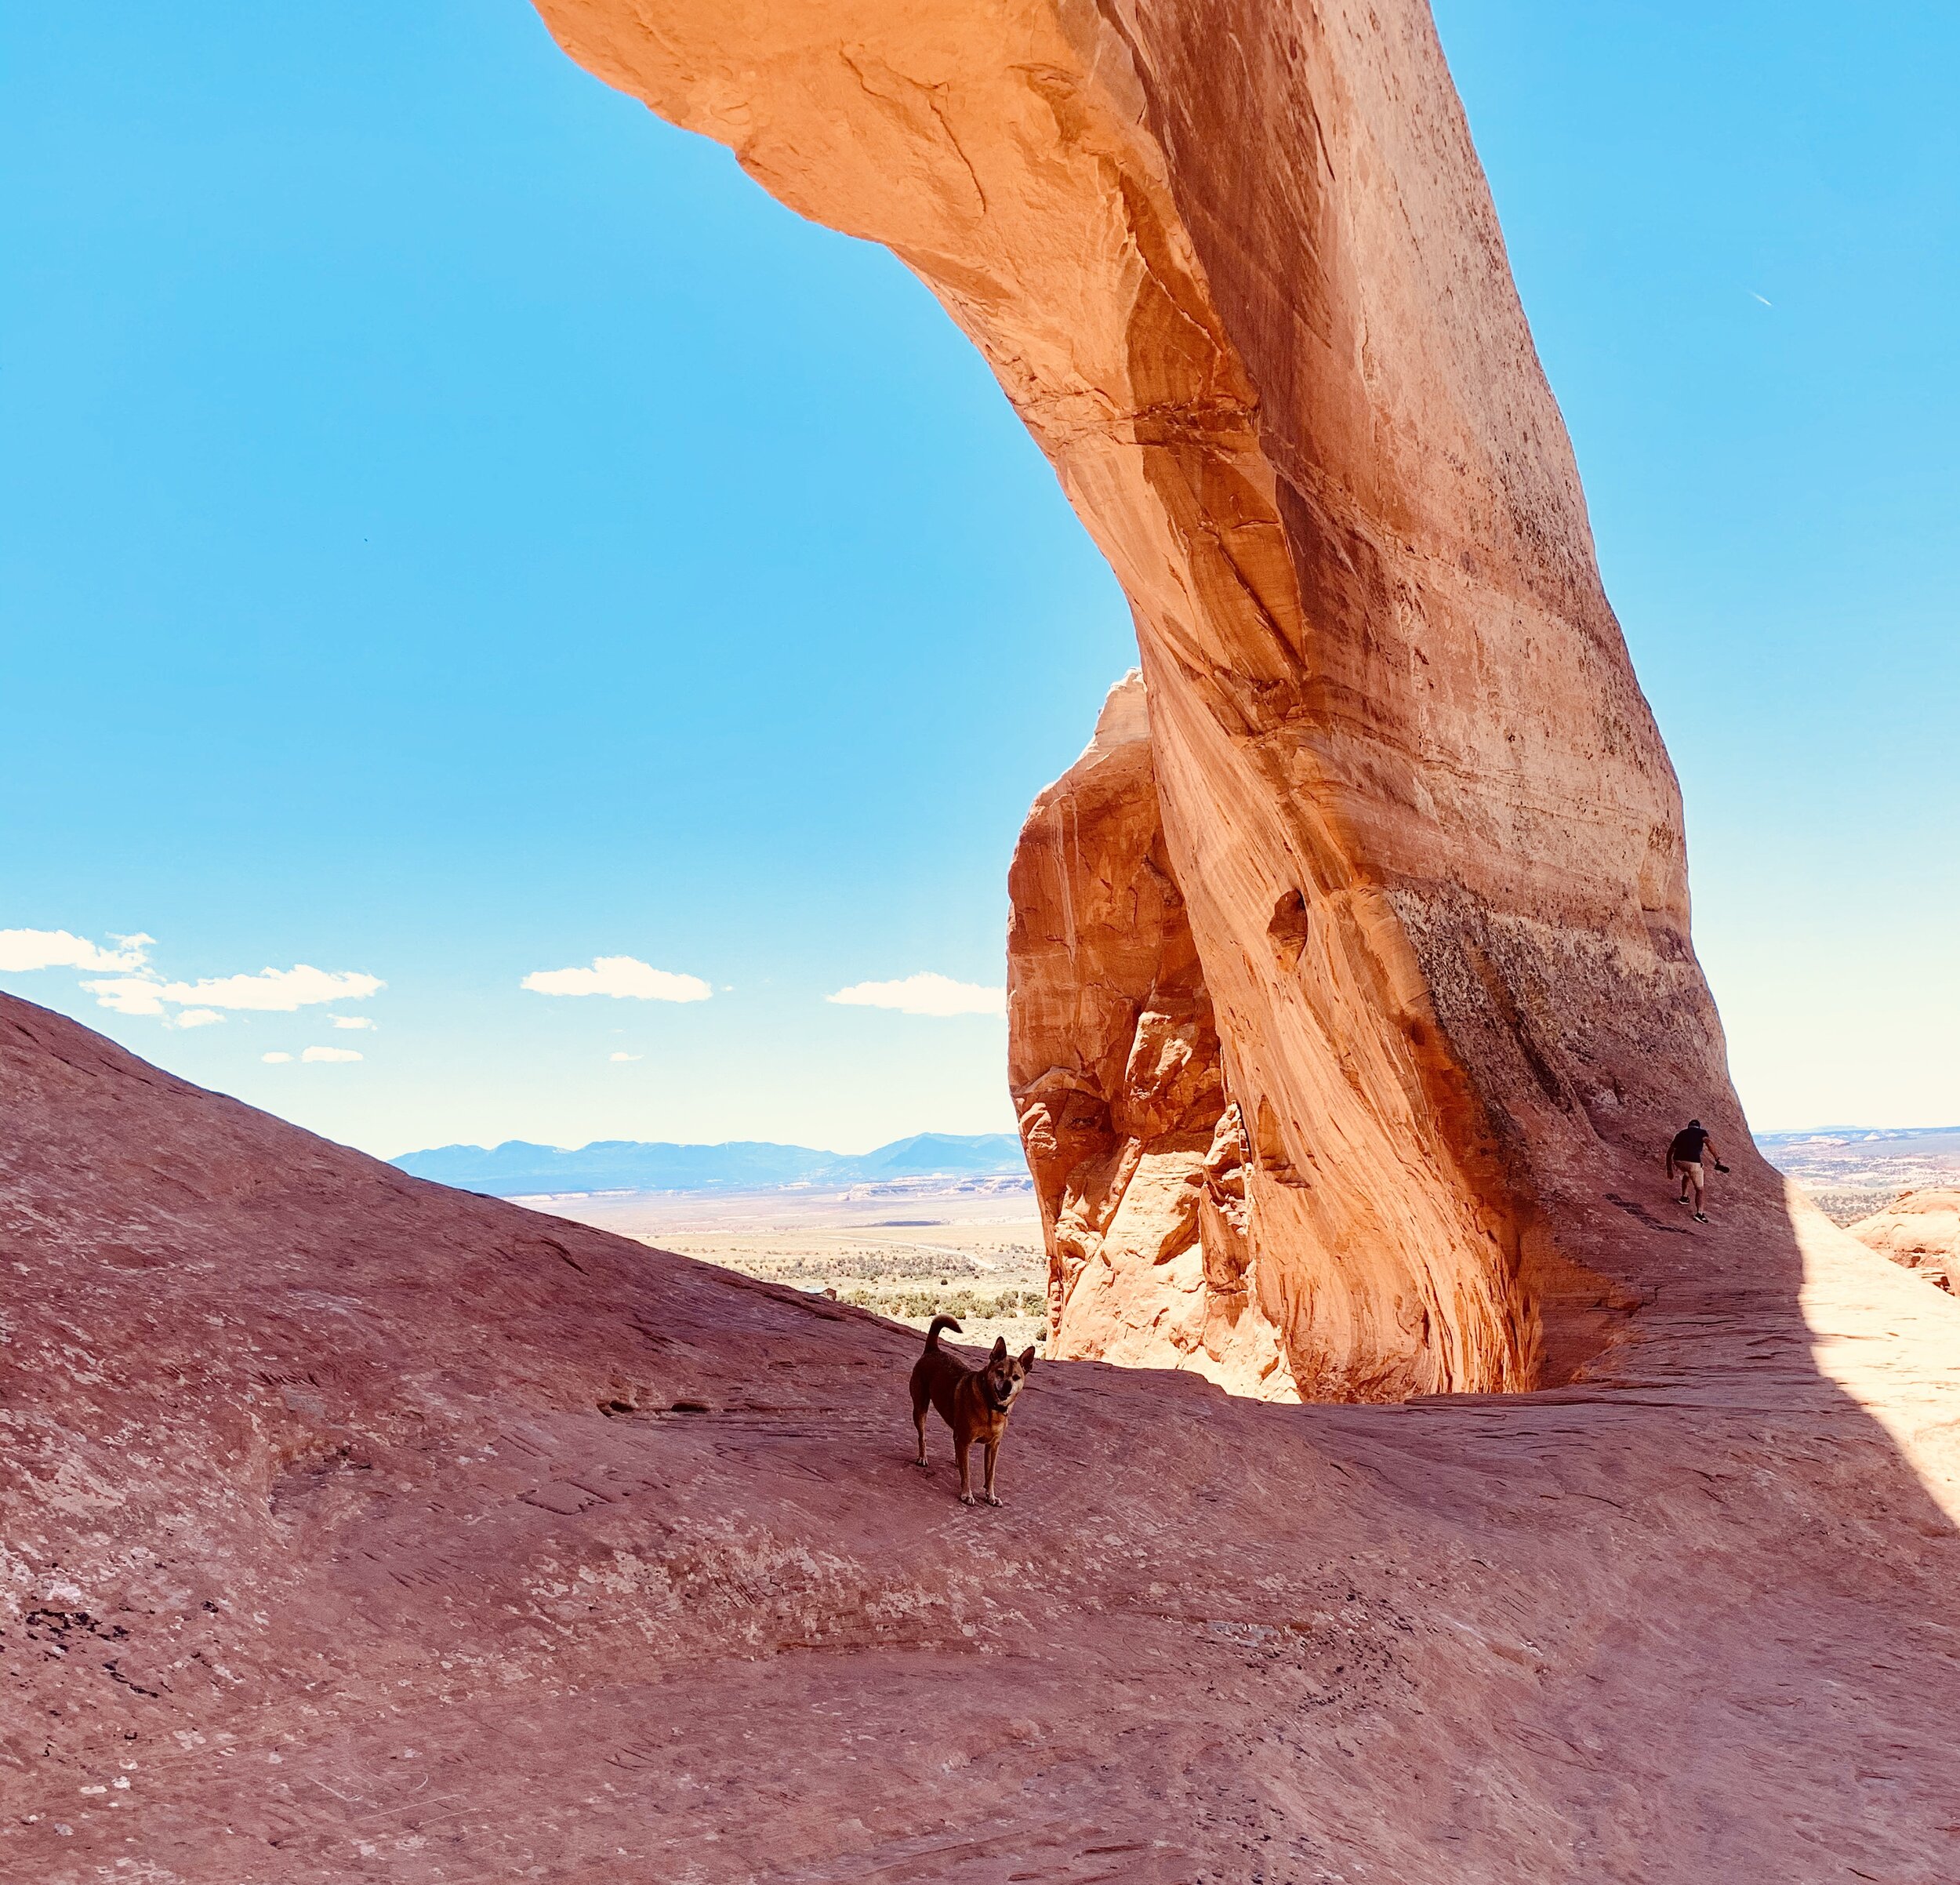  We spotted this large arch on the side of the road in La Sal, UT. We hopped out and climbed it for a little exercise on our journey. The pictures hardly give justice to how large this arch is. 